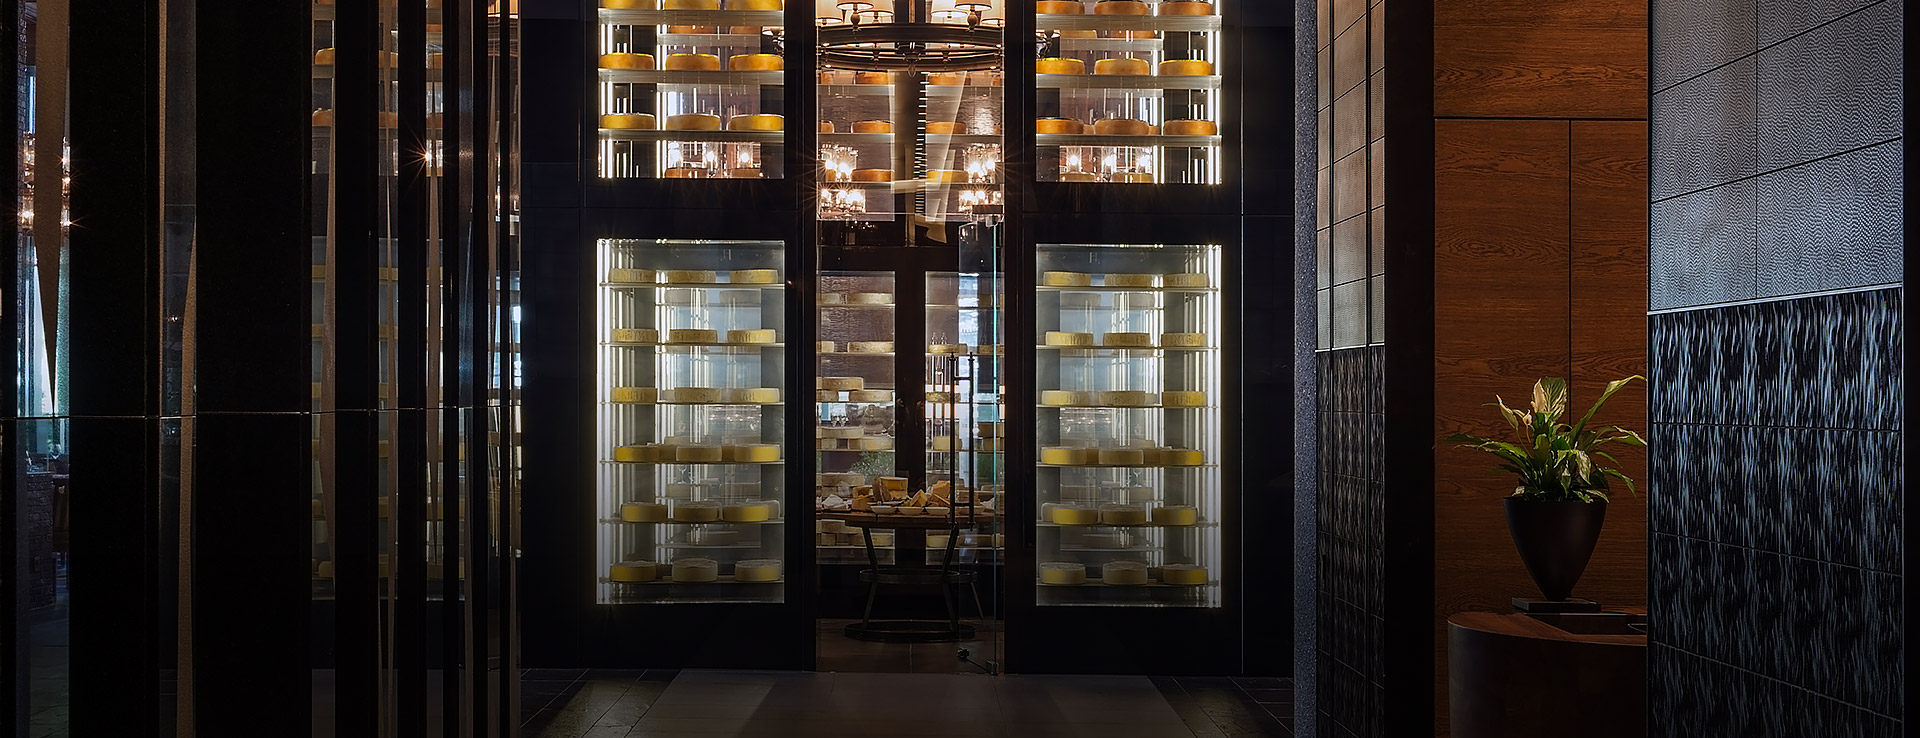 Numerous cheeses are stored in a metre-high, glass humidor